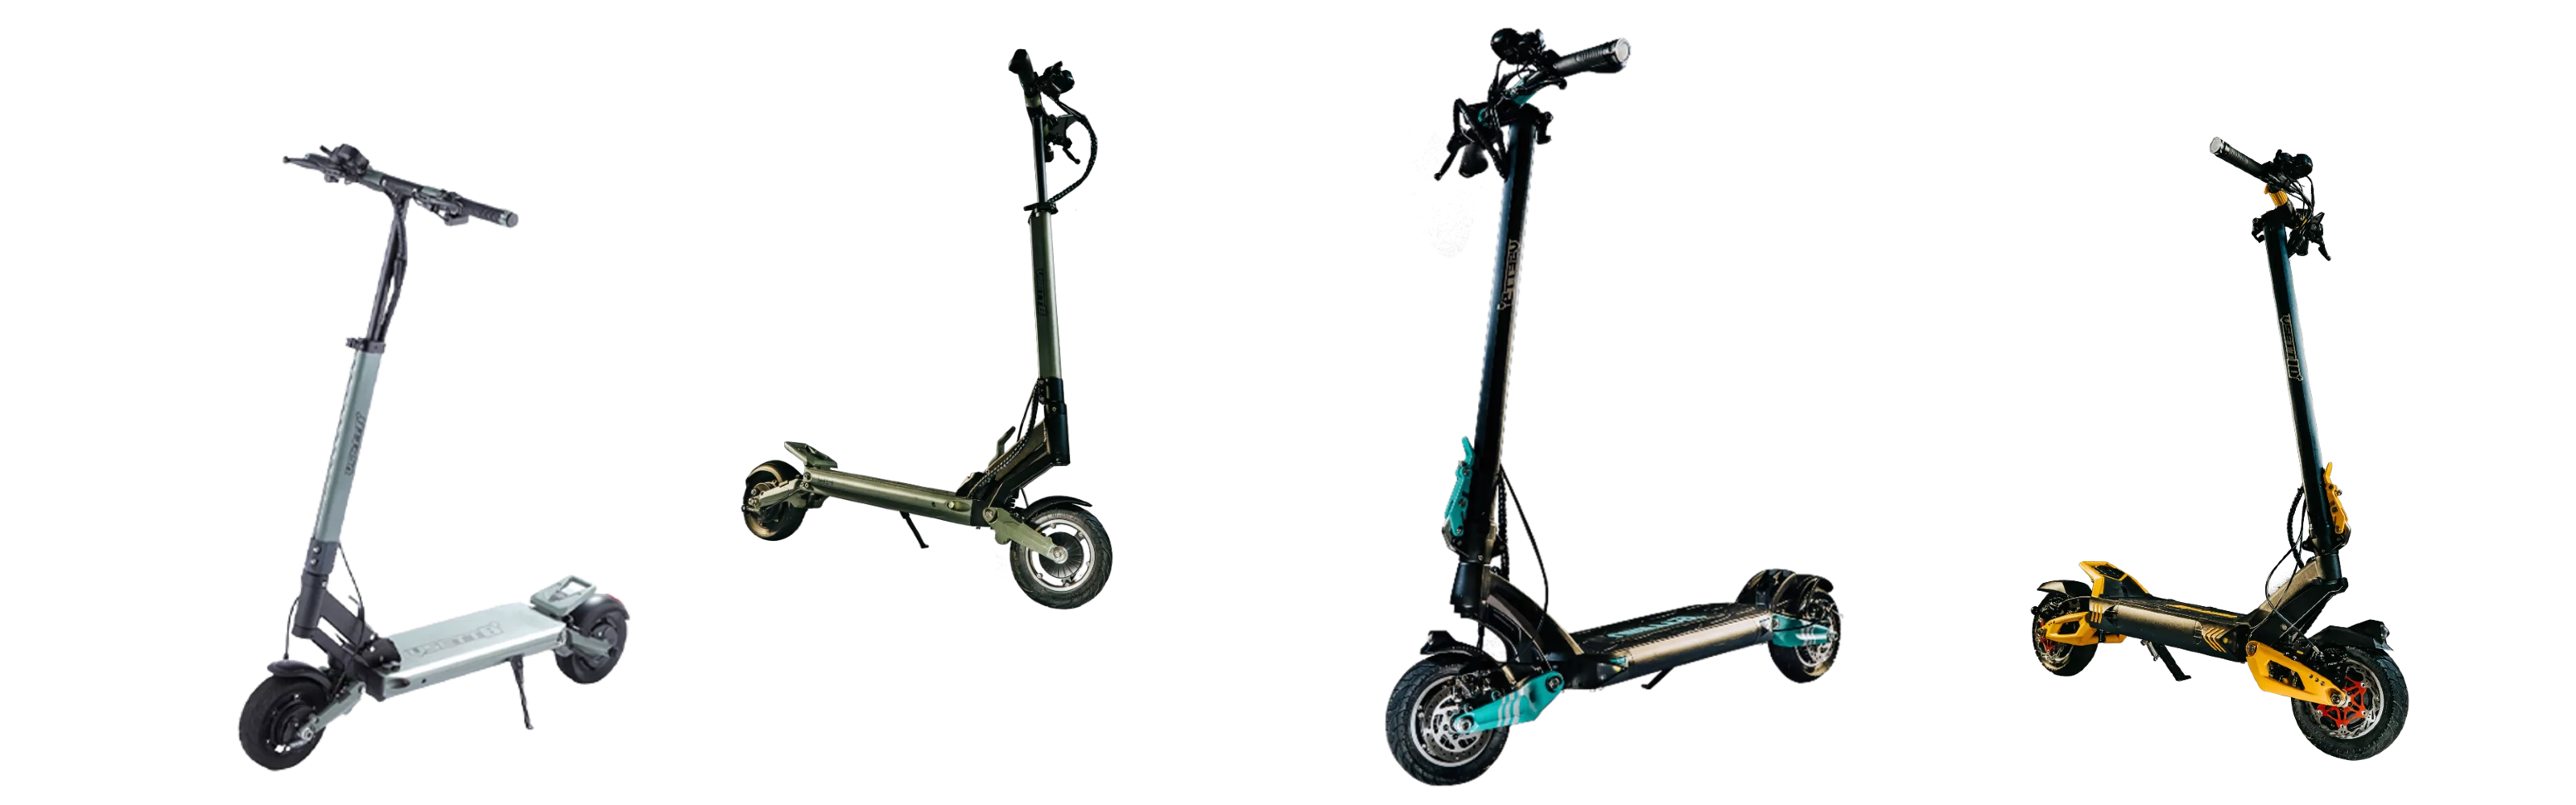 VSETT Electric Scooter Footer Background | Ride and Glide